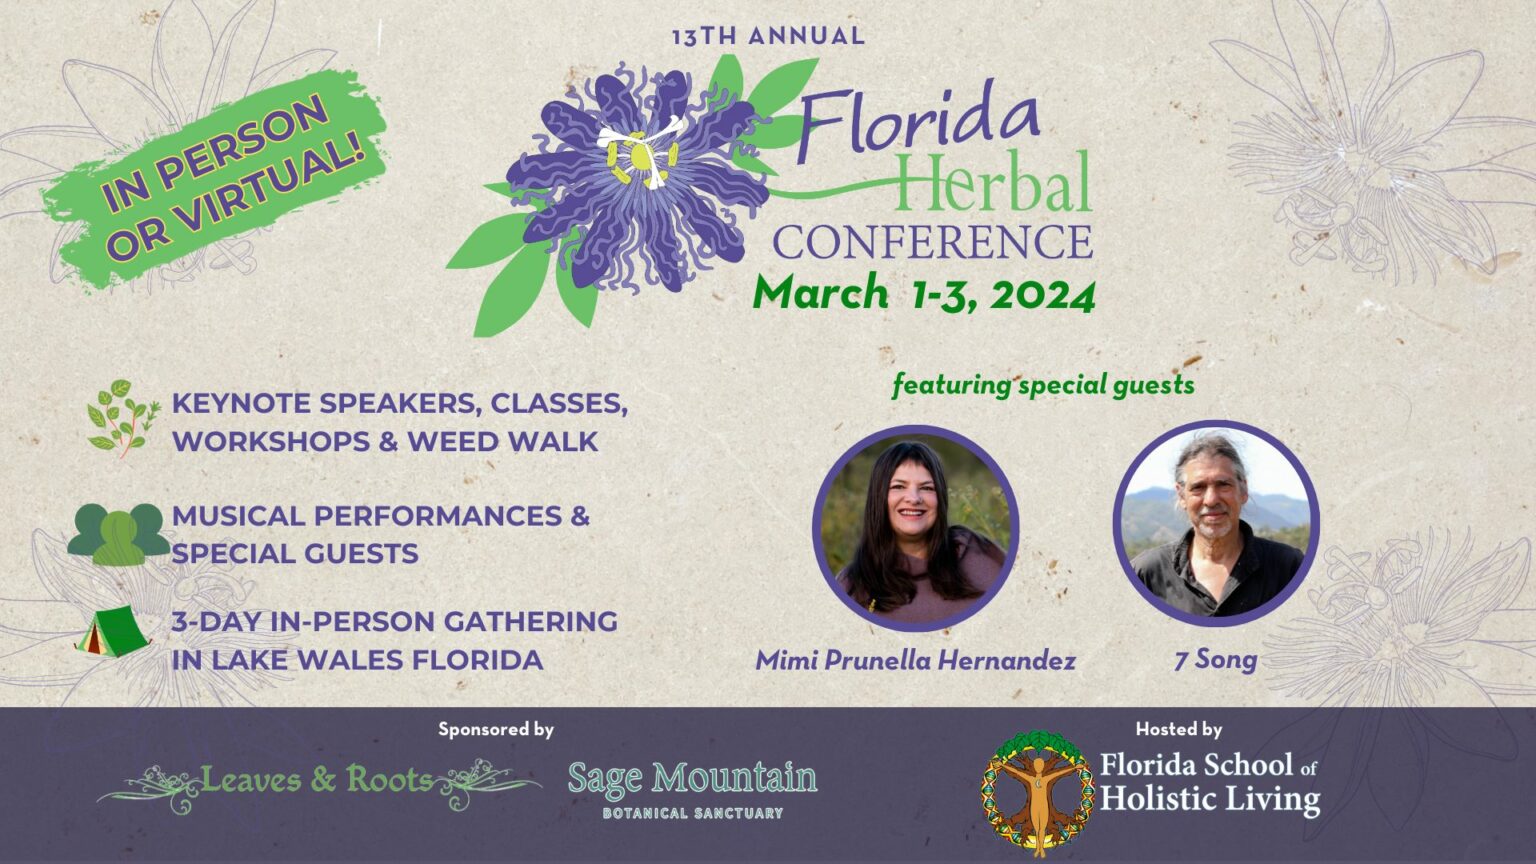 Florida Herbal Conference Celebrating 13 Years